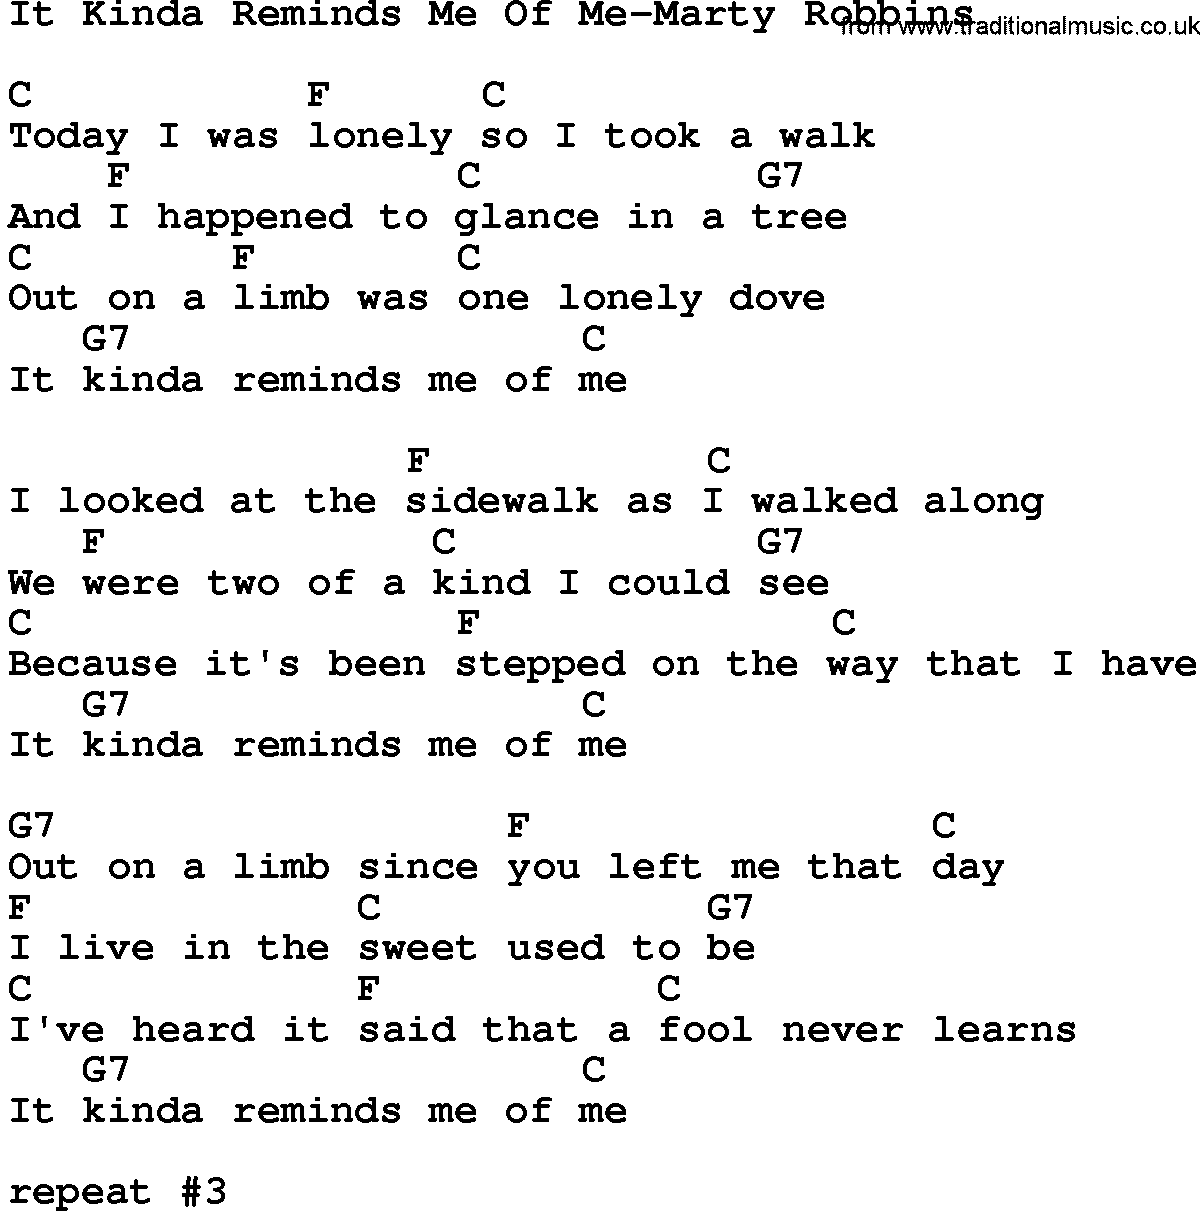 Country music song: It Kinda Reminds Me Of Me-Marty Robbins lyrics and chords